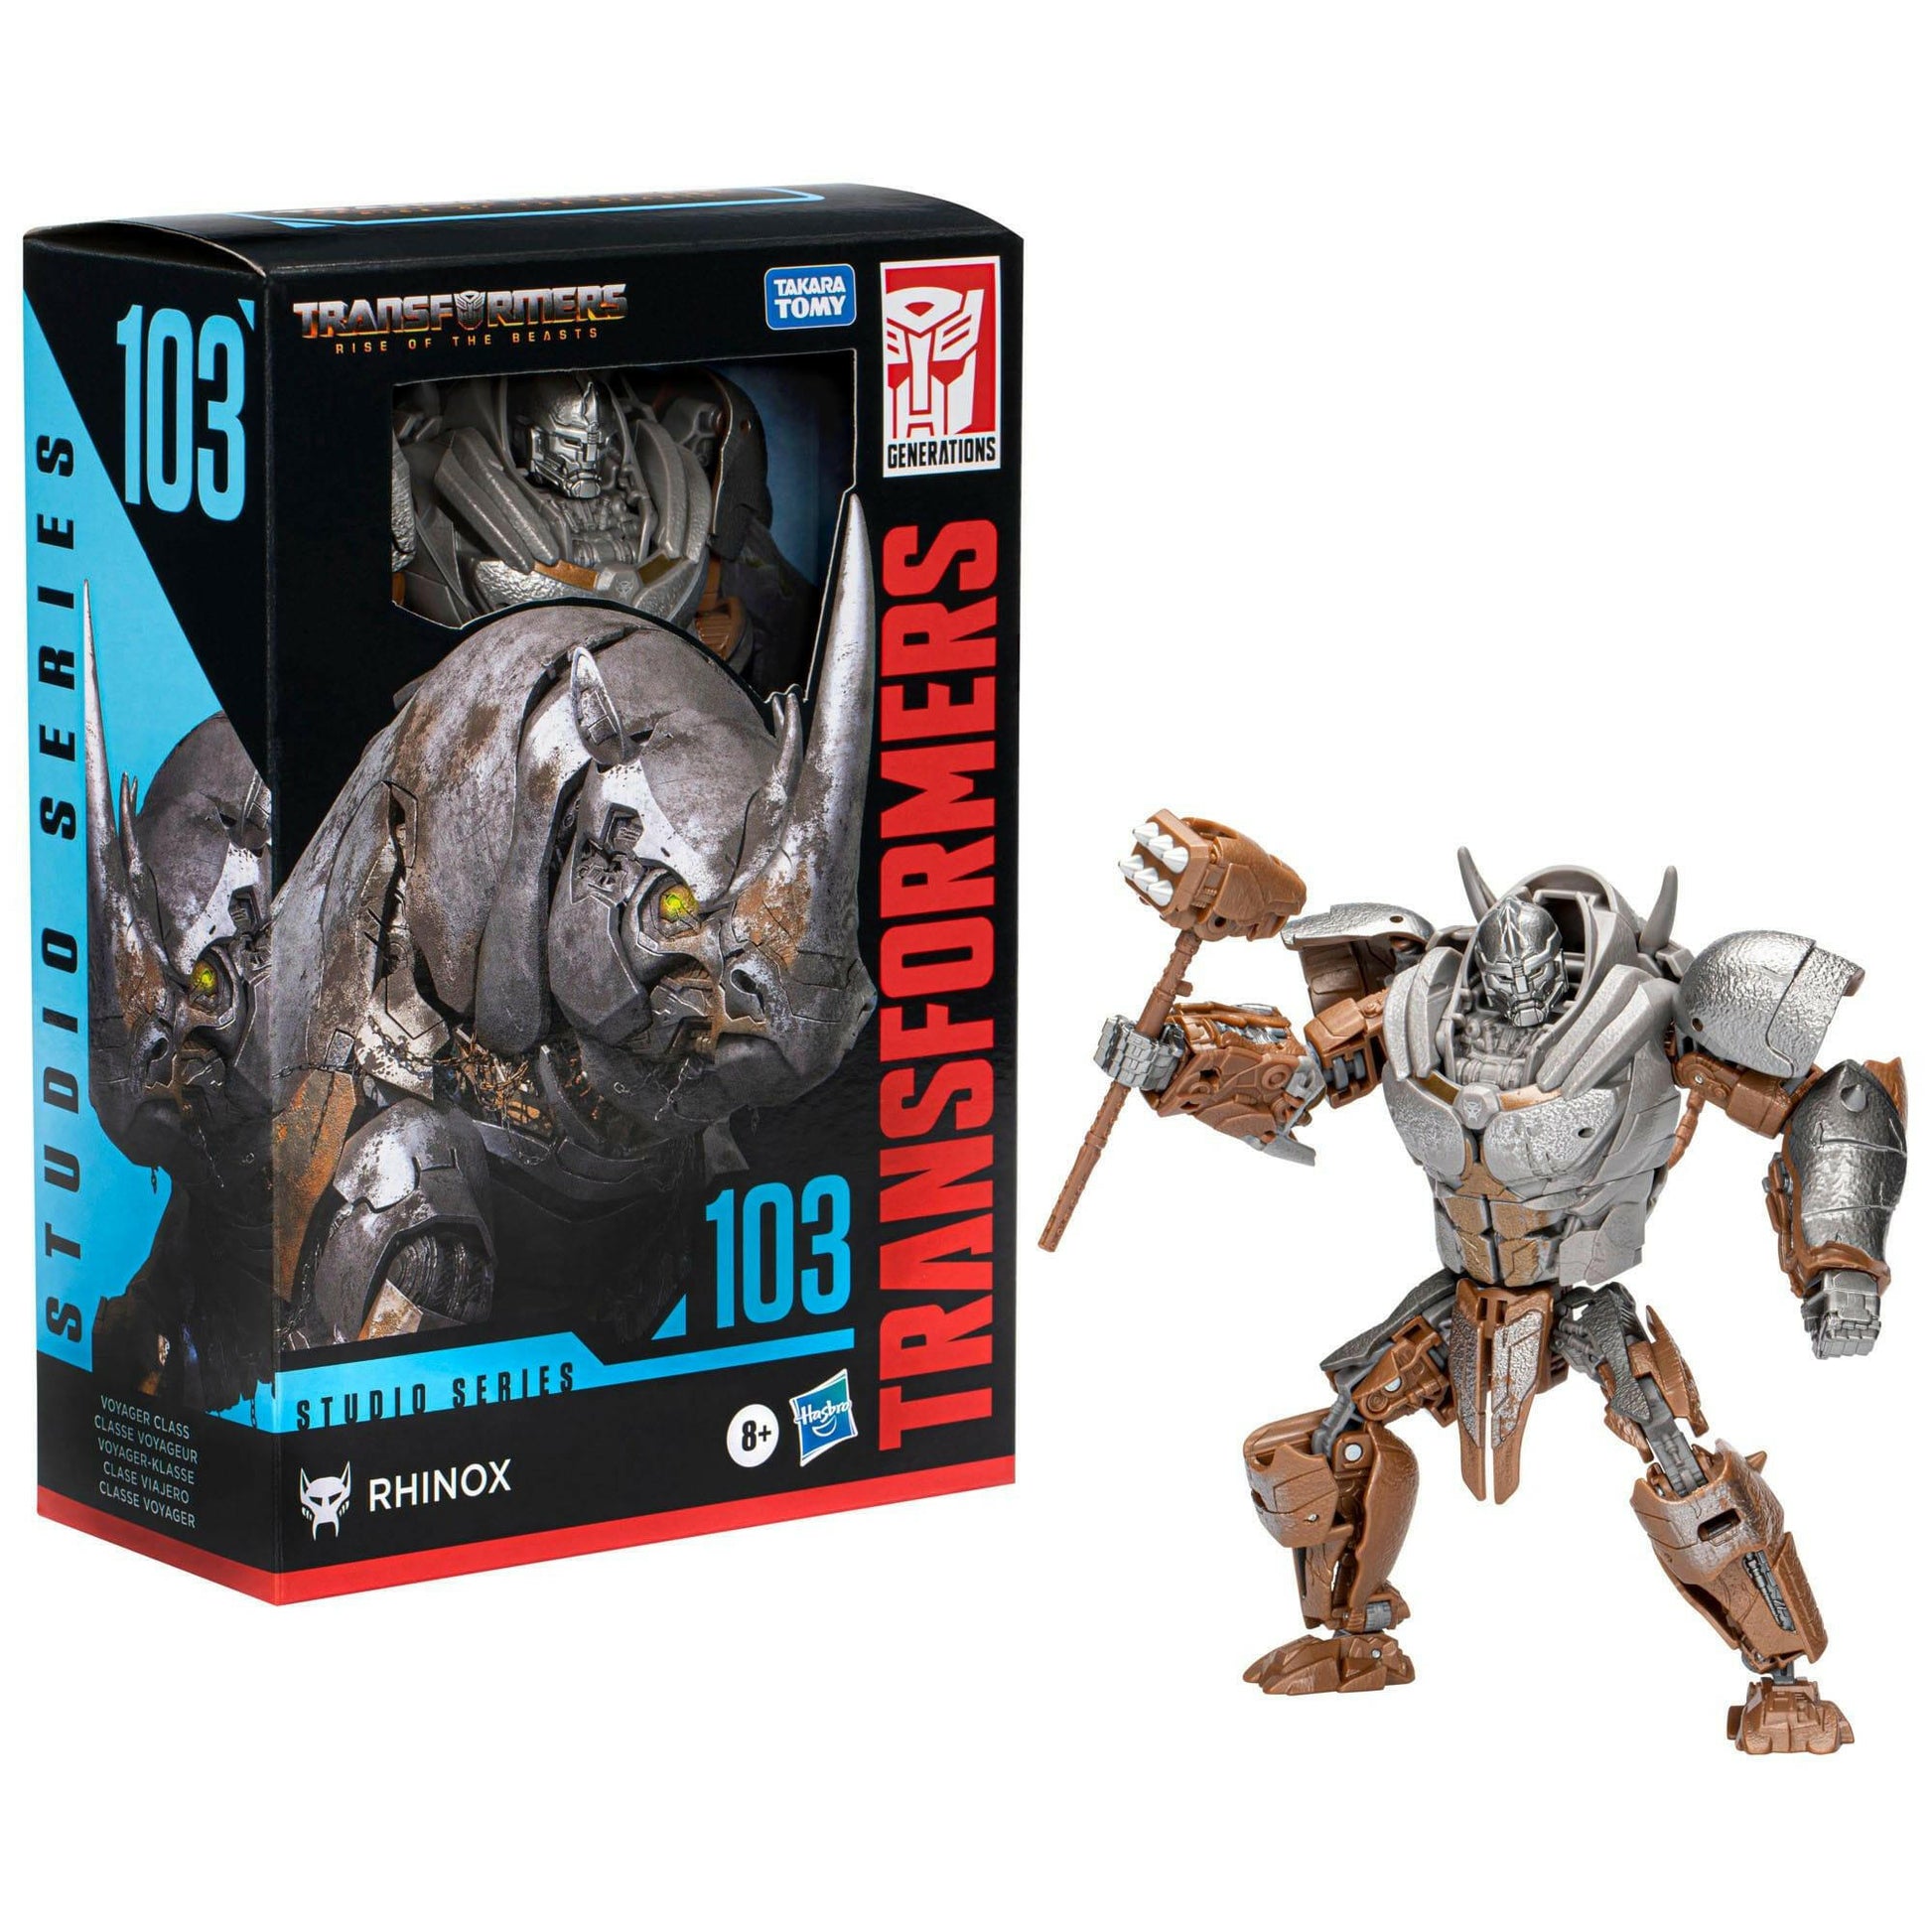 Transformers: Rise of the Beasts Studio Series Voyager Class Actionfigur 103 Rhinox 16cm - Toy-Storage